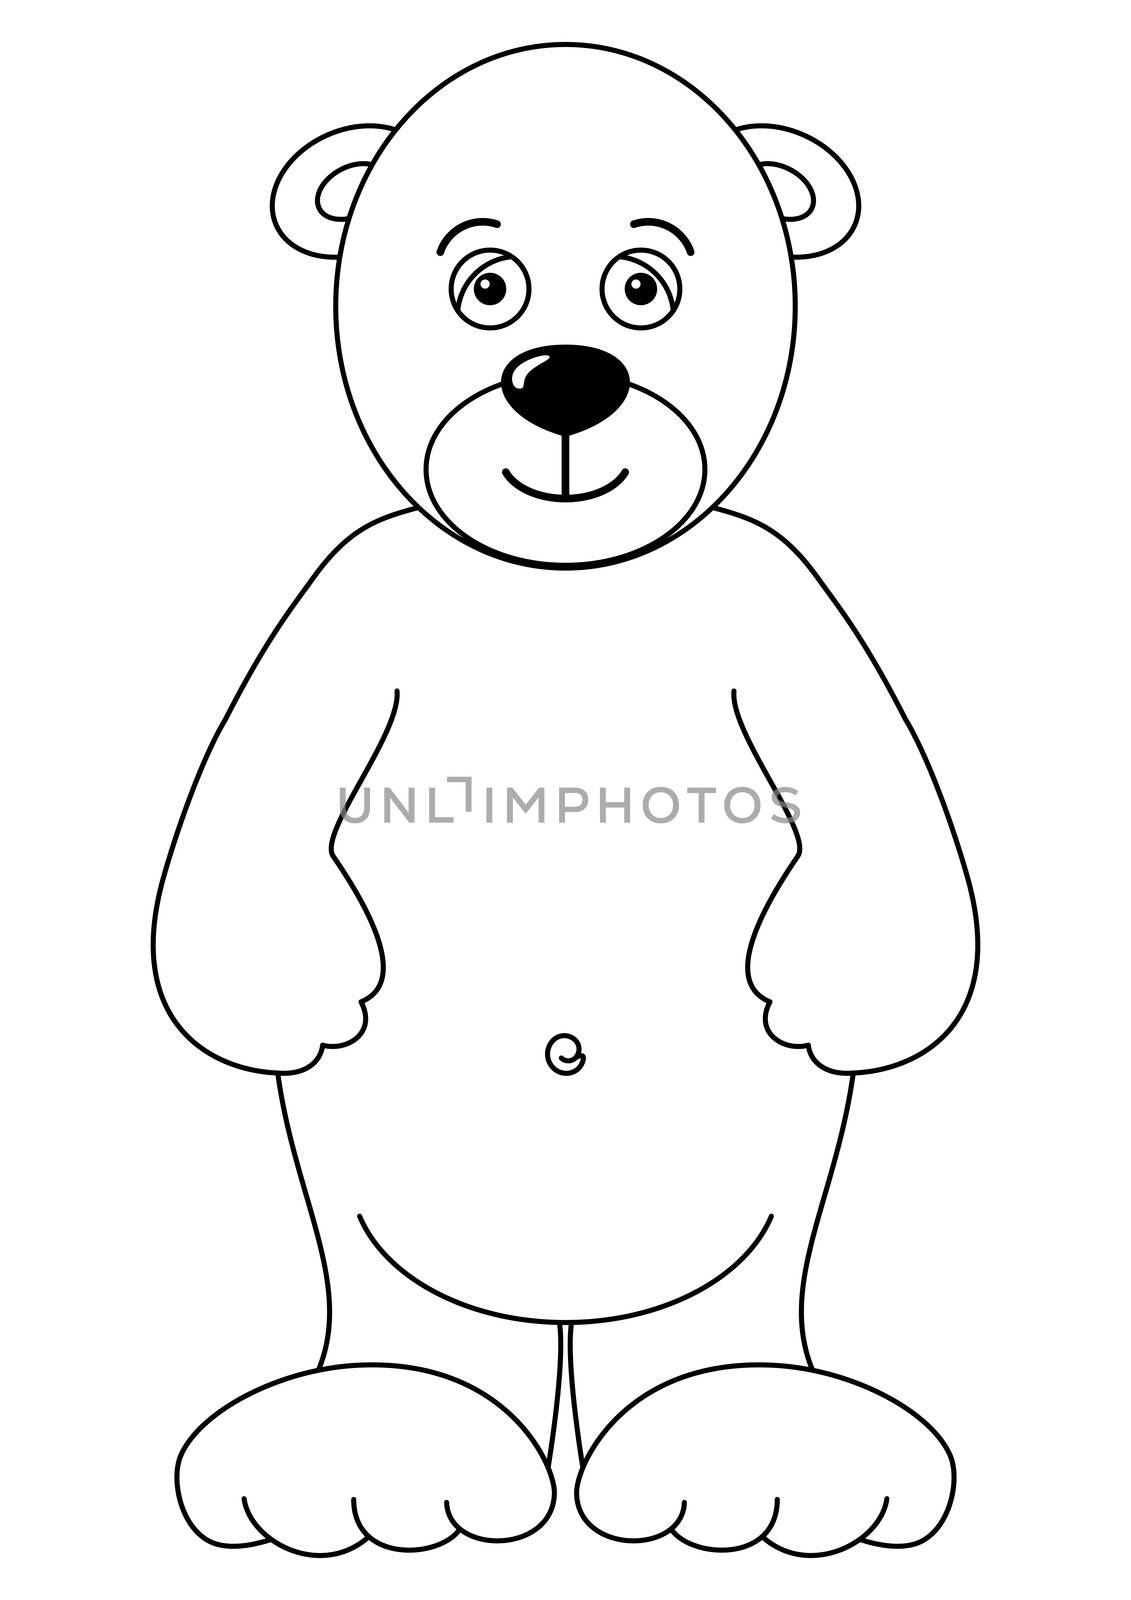 Teddy-bear isolated, contours by alexcoolok